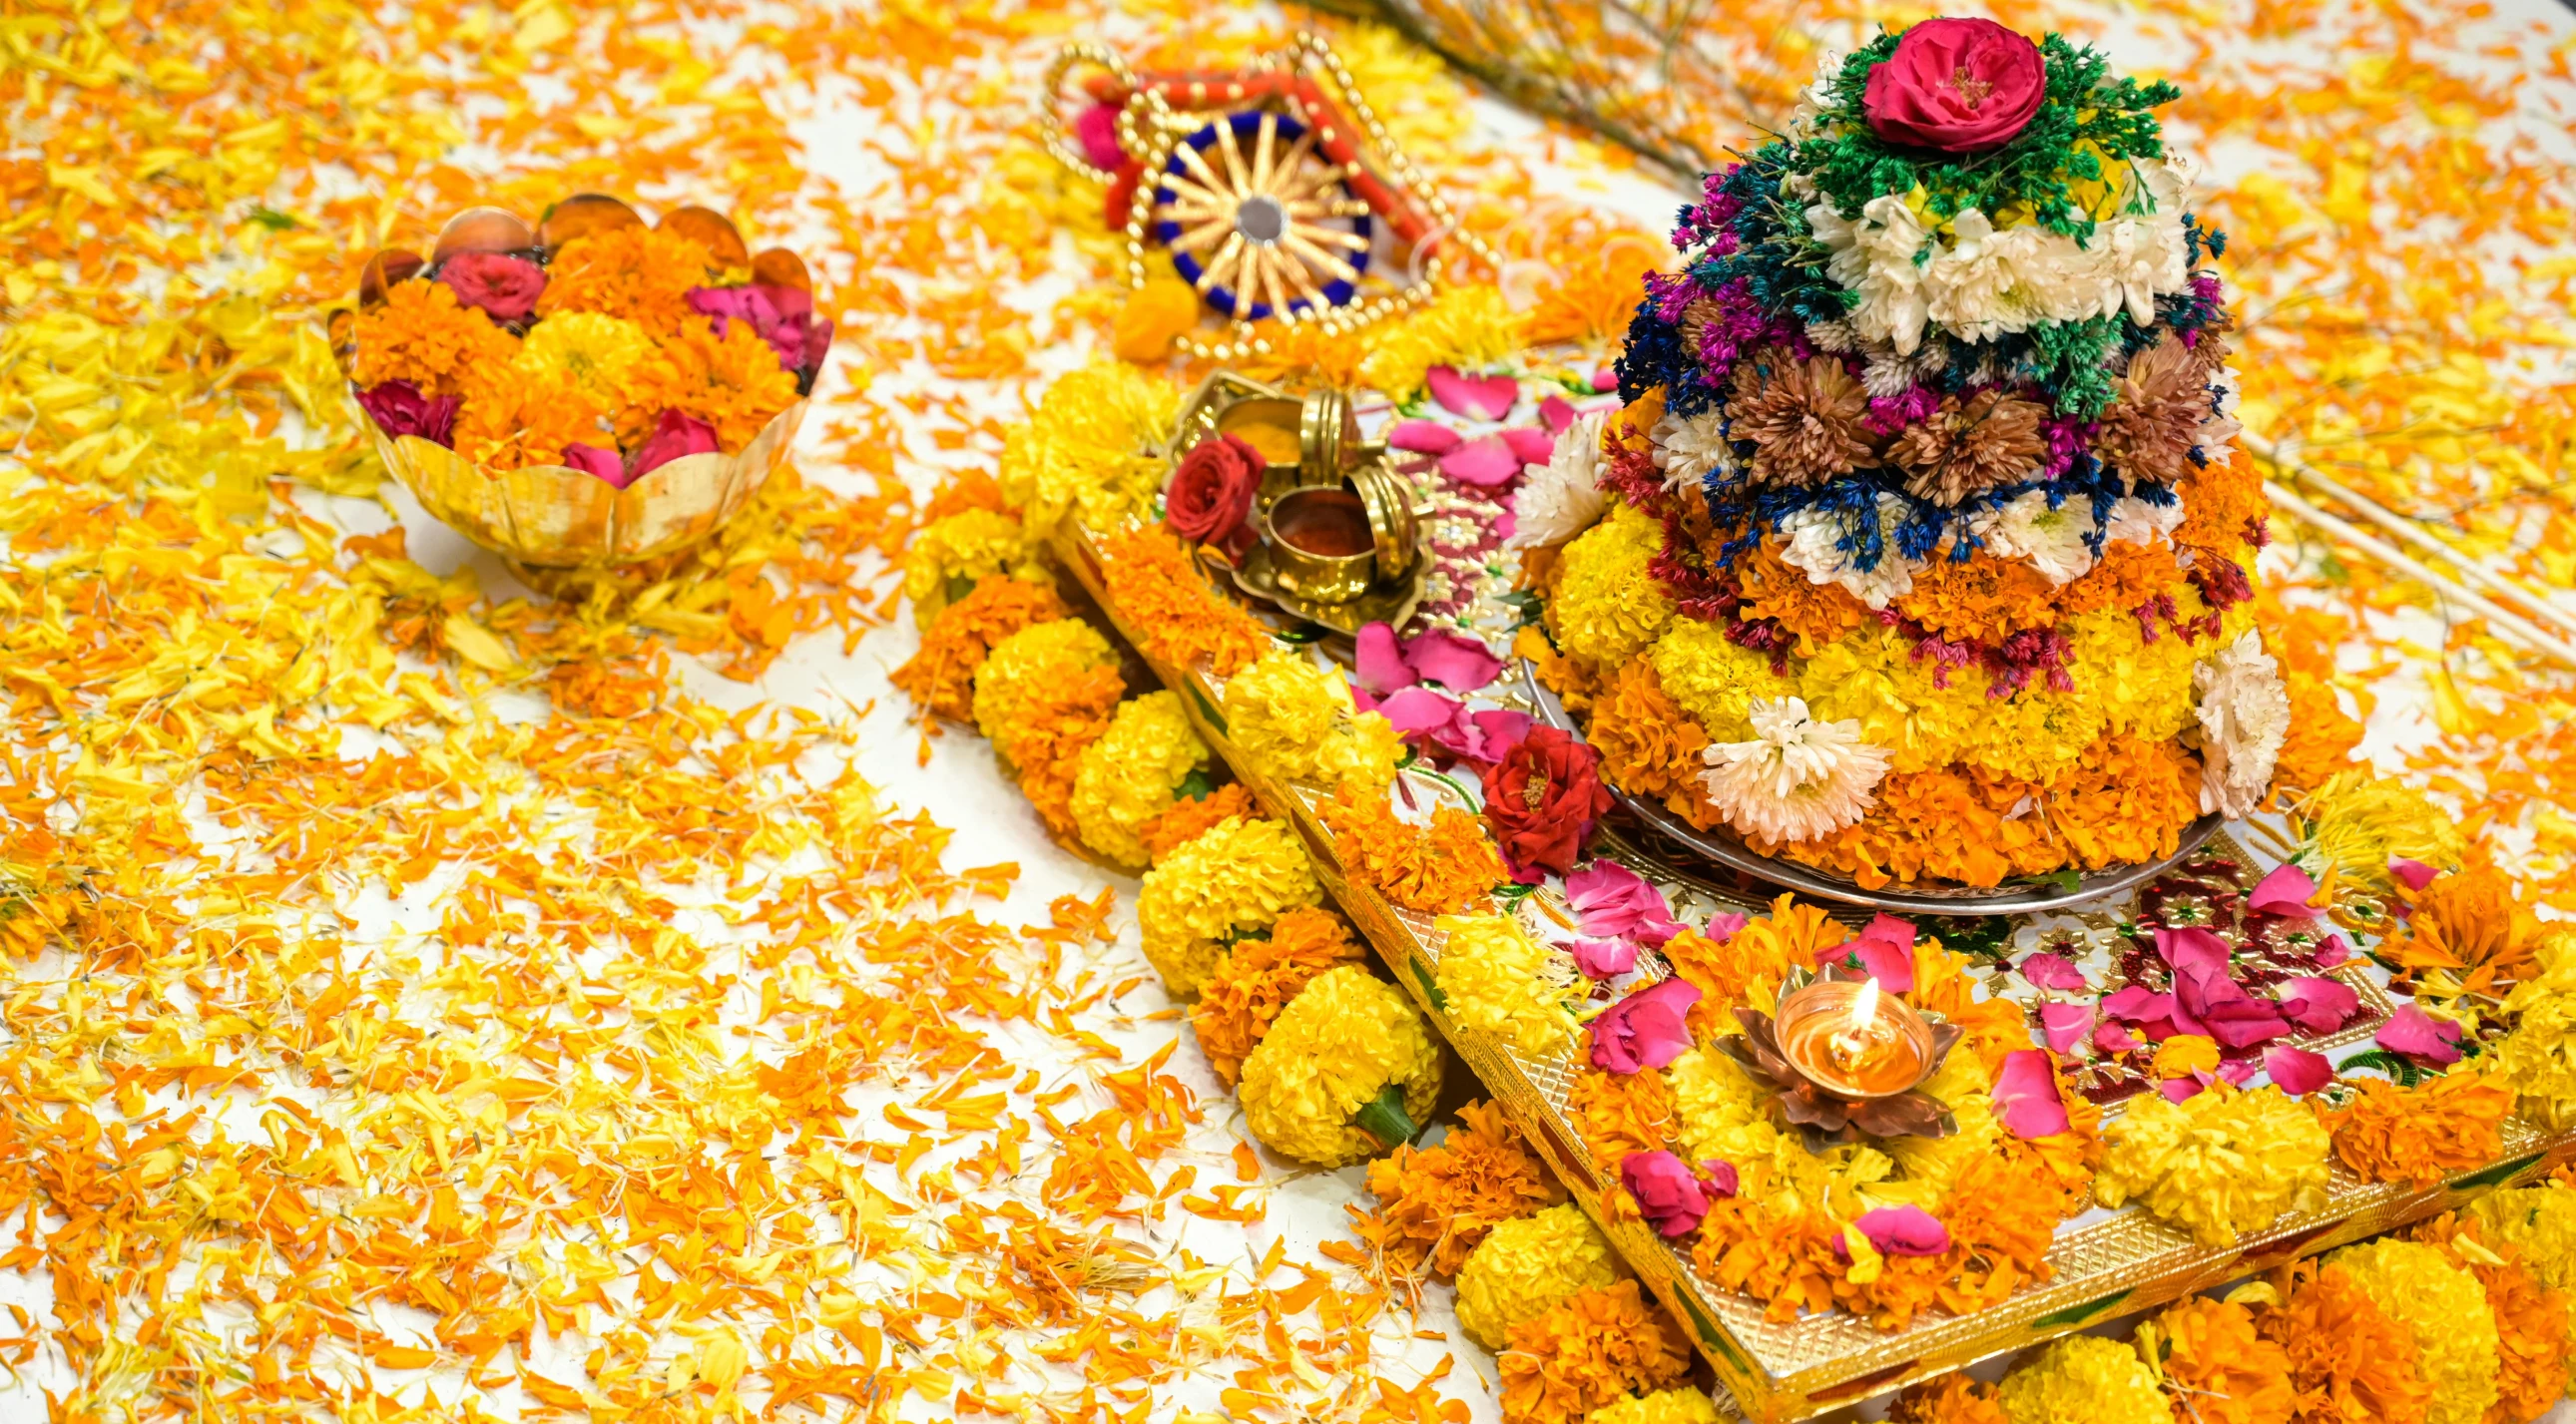 an elaborate decoration with flowers and petals